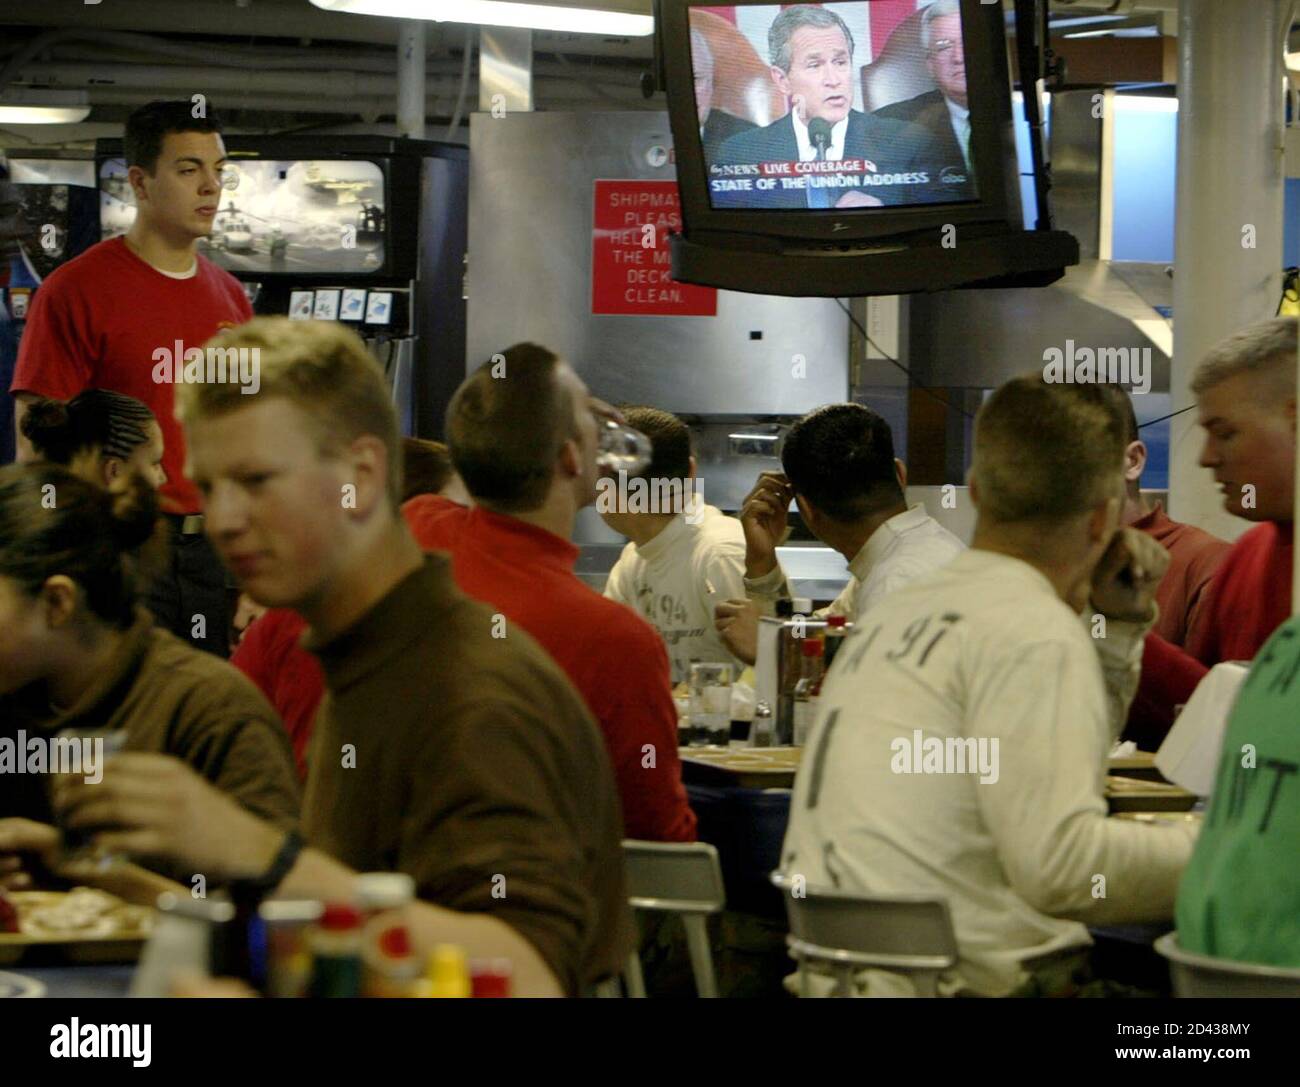 Sailors eat their dinner as President George W. Bush, on a satellite television feed from Washington D.C., delivers his State of the Union Address as they sit in the mess hall aboard the aircraft carrier USS Nimitz 100 miles off the coast of California, January 28, 2003. The Nimitz and it's battle group are on the final days of training and are awaiting orders to deploy to the Middle East. REUTERS/Mike Blake  MB/ME Stock Photo